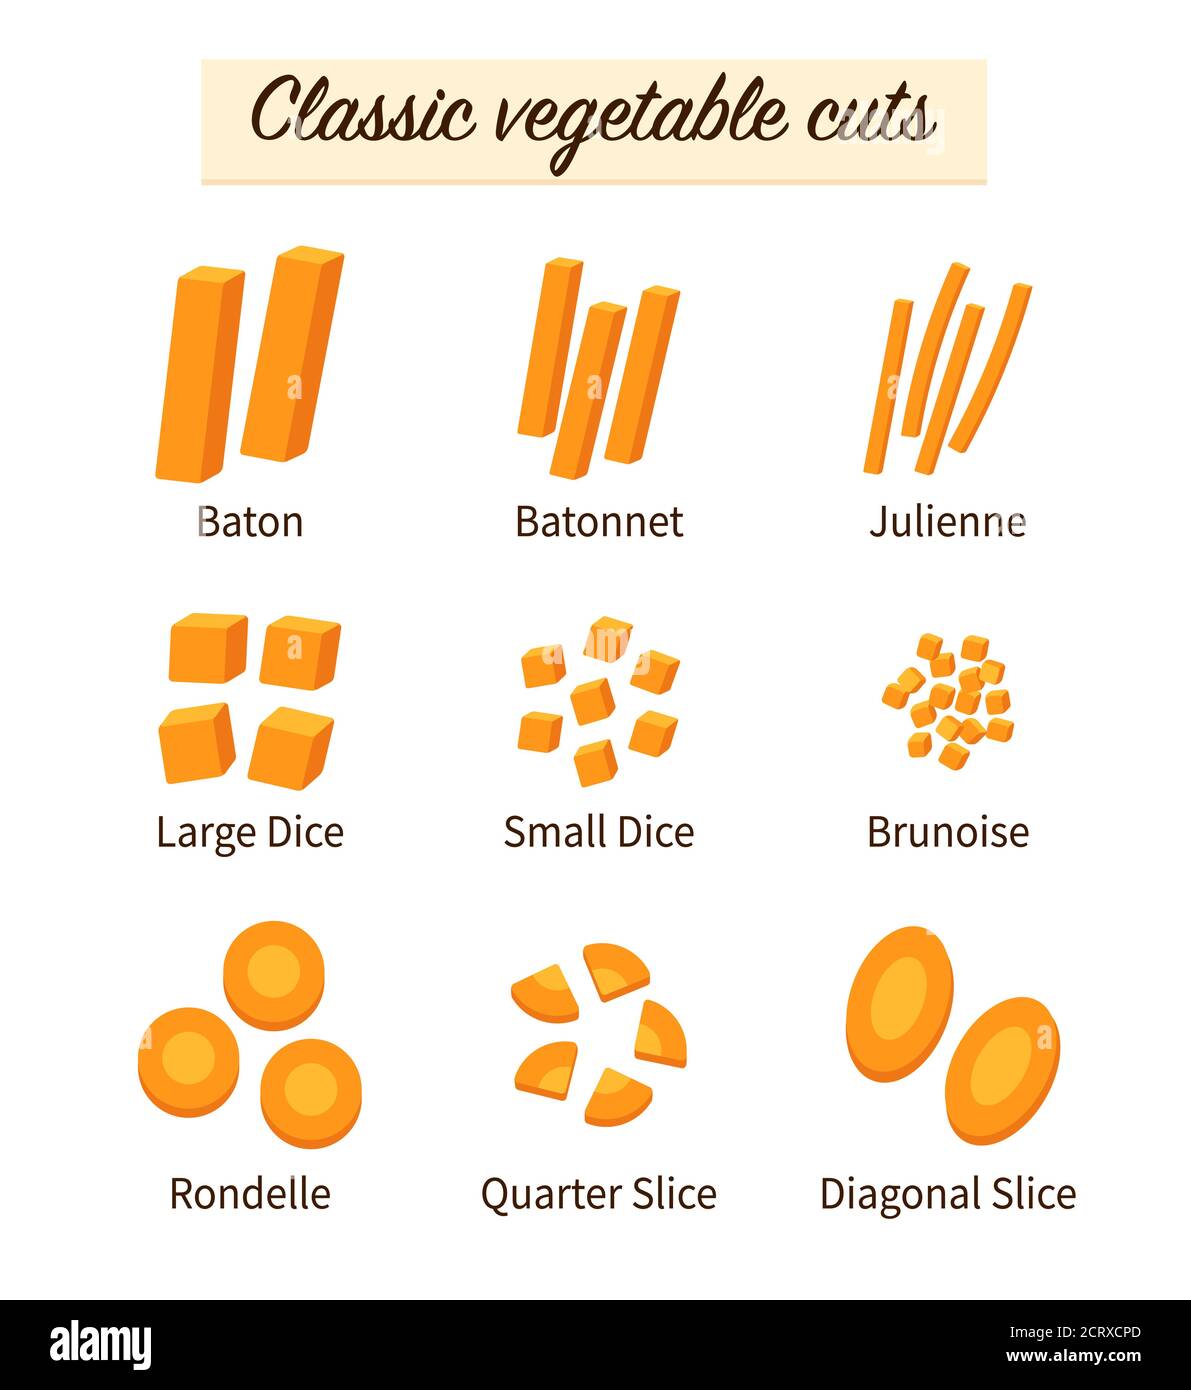 https://c8.alamy.com/comp/2CRXCPD/vegetable-cut-types-infographic-carrot-cut-in-sticks-julienne-dice-and-slice-food-cooking-technique-vector-illustration-2CRXCPD.jpg